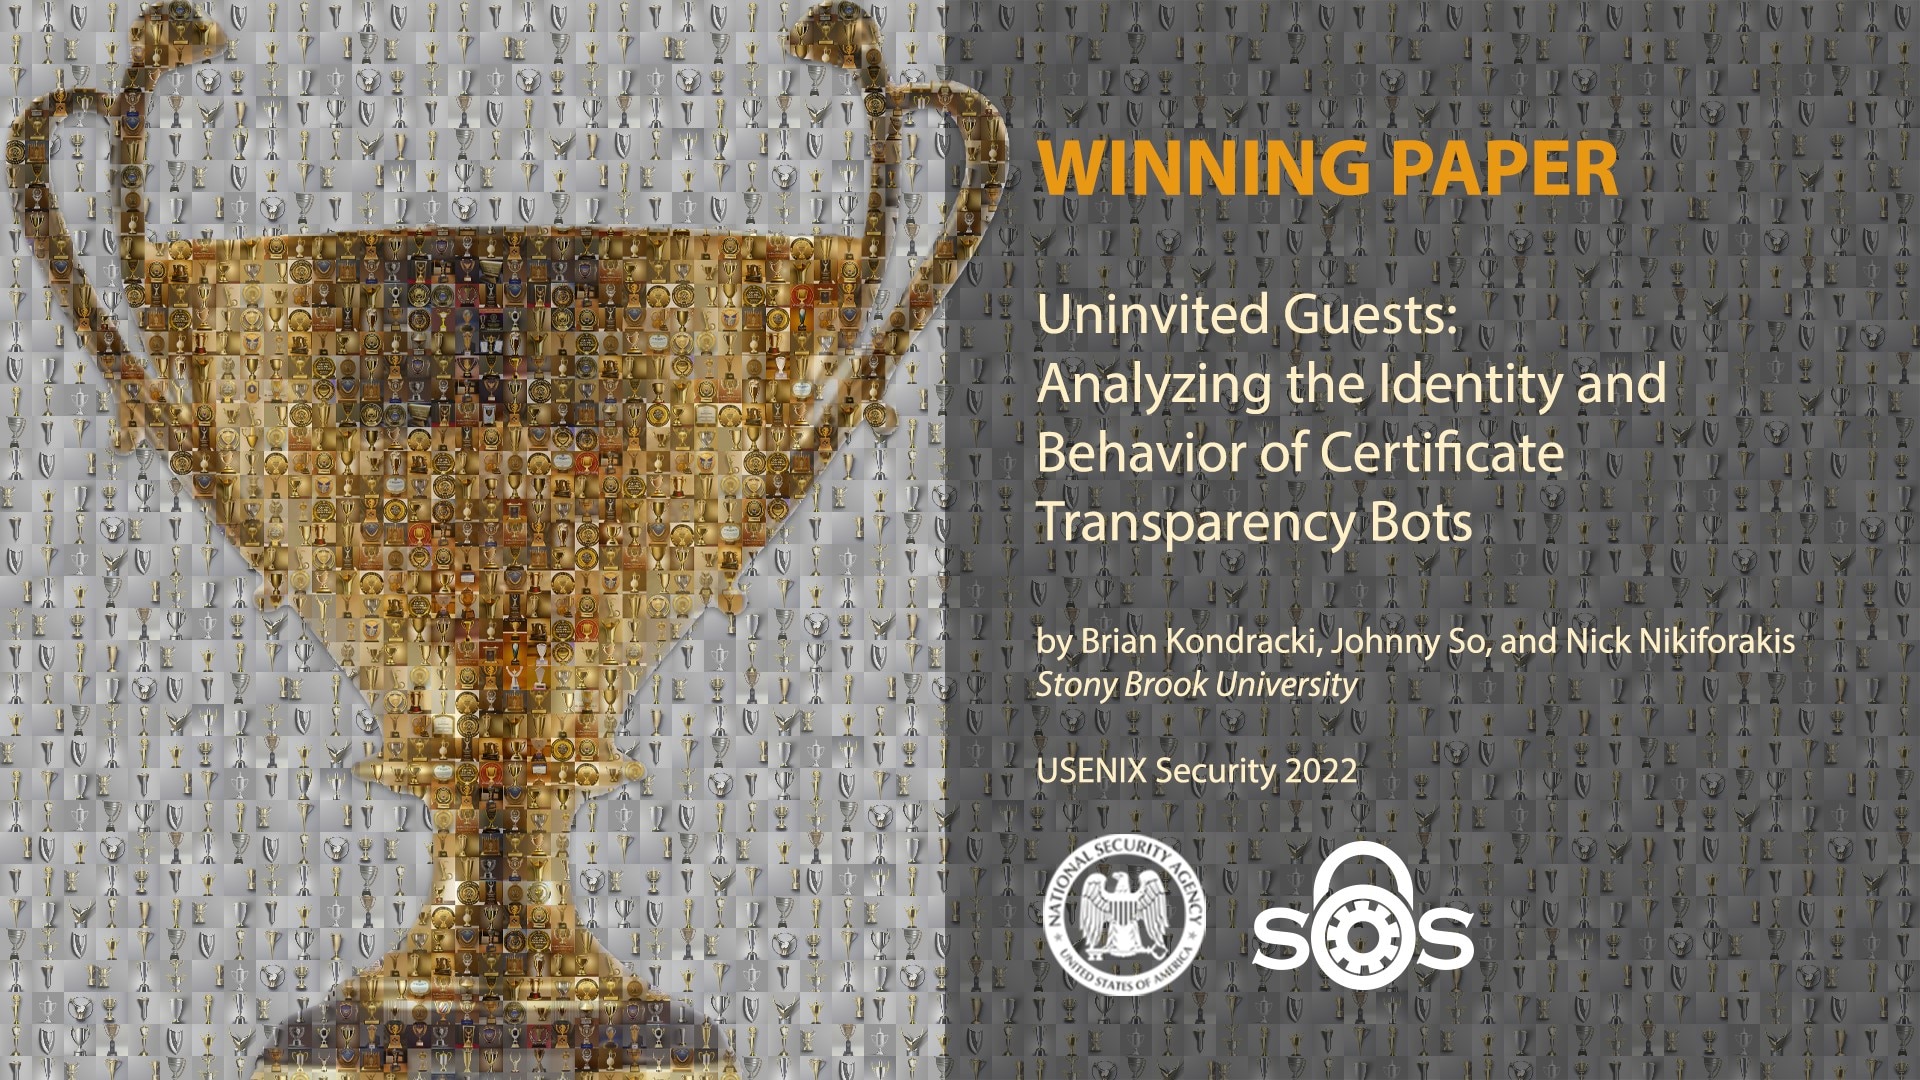 NSA Research is proud to announce the winning paper for the 11th annual Best Scientific Cybersecurity Paper Competition, “Uninvited Guest: Analyzing the Identity and Behavior of Certificate Transparency Bots.”